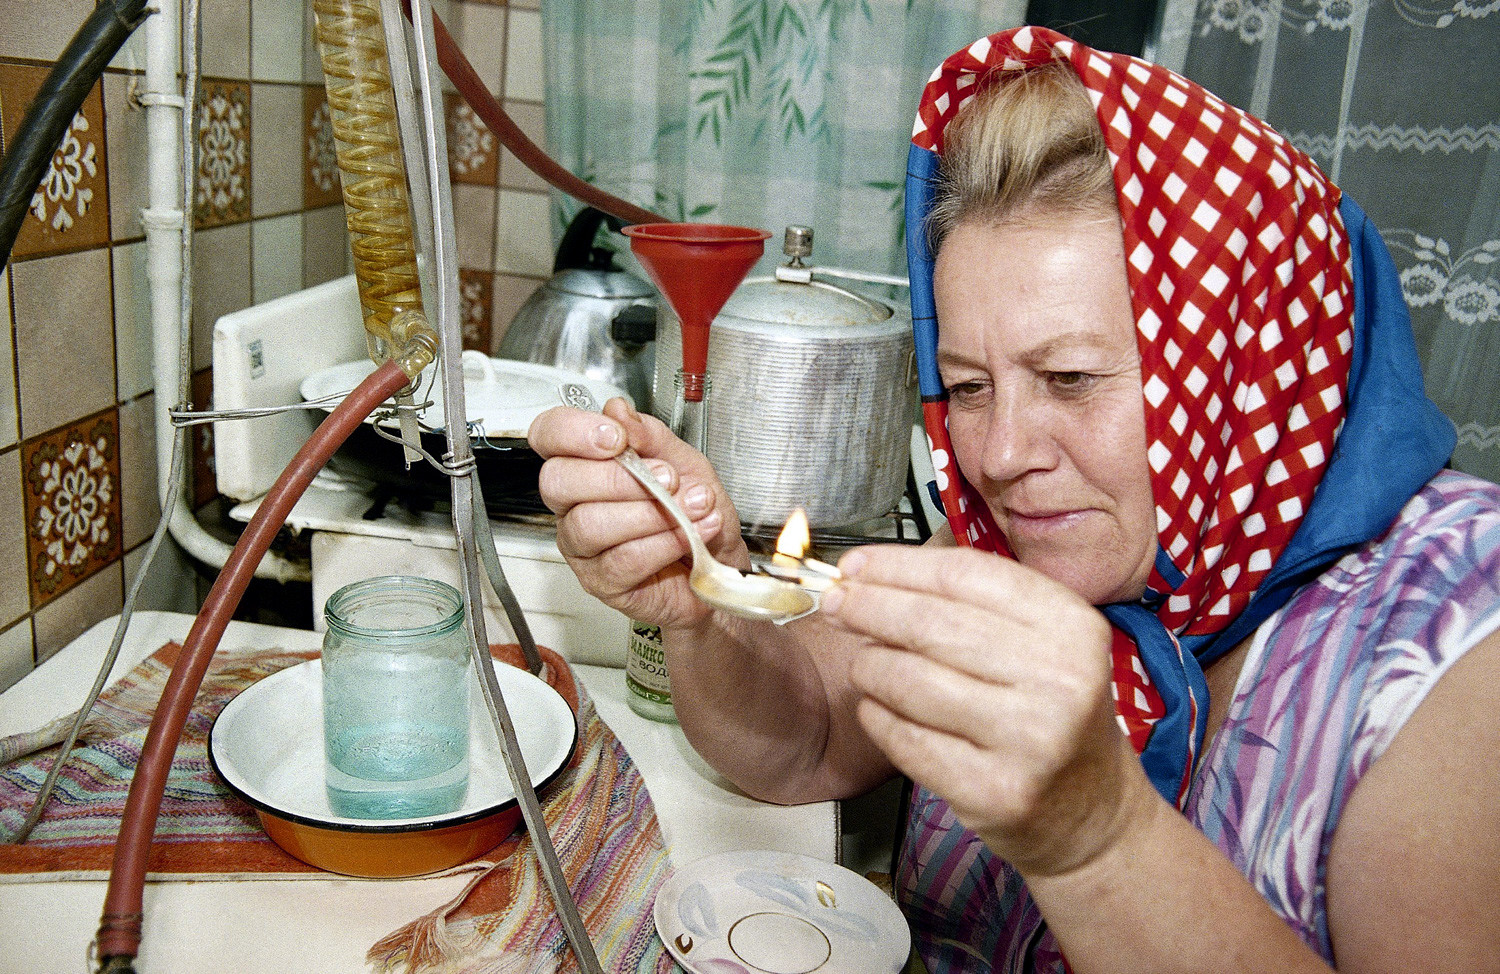 A woman in the southern Russian city of Maikop lights with a match a spoonful of the moonshine she made, to check its quality